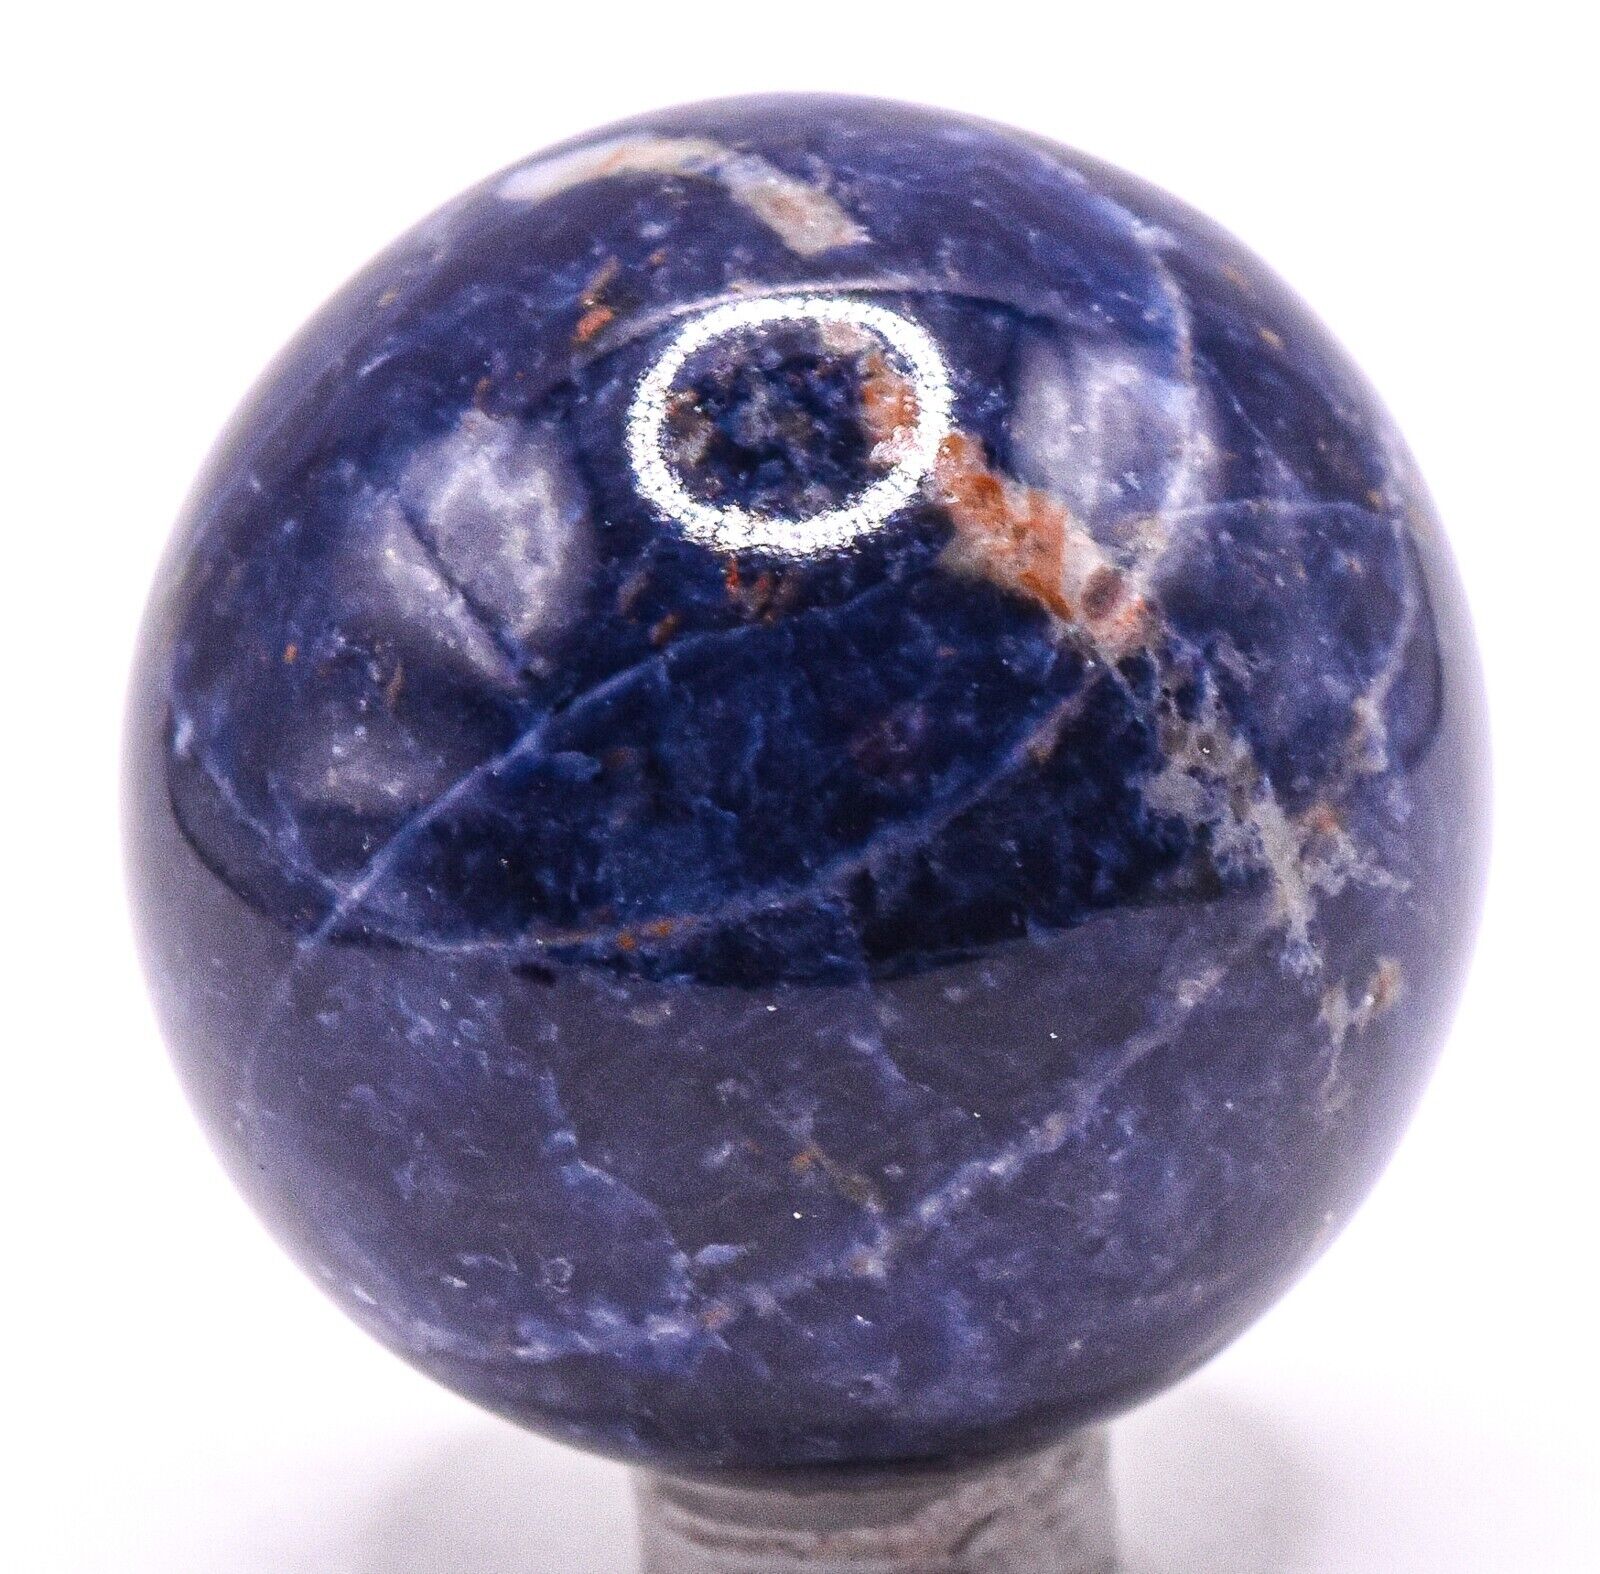 46mm Deep Blue Sodalite w/ Inlcusions Sphere Polished Gemstone Mineral S. Africa